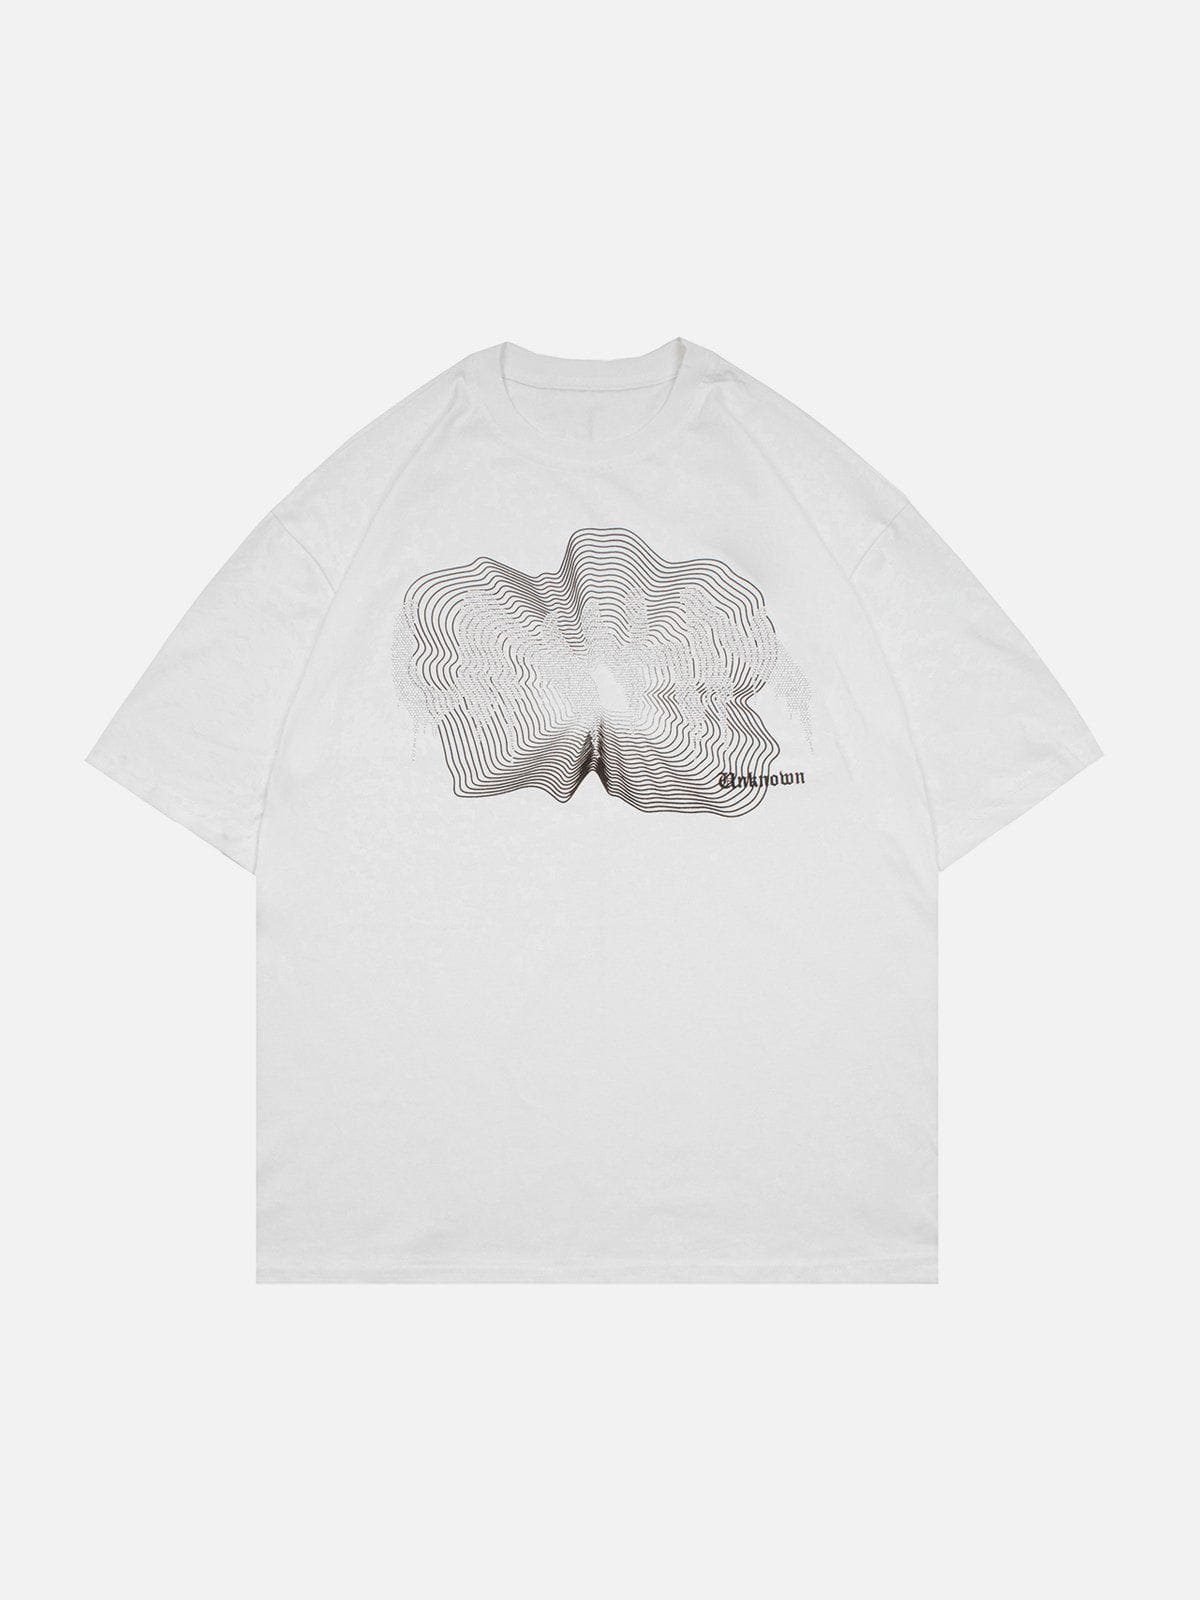 Sneakerland™ - Abstract Paint Tee